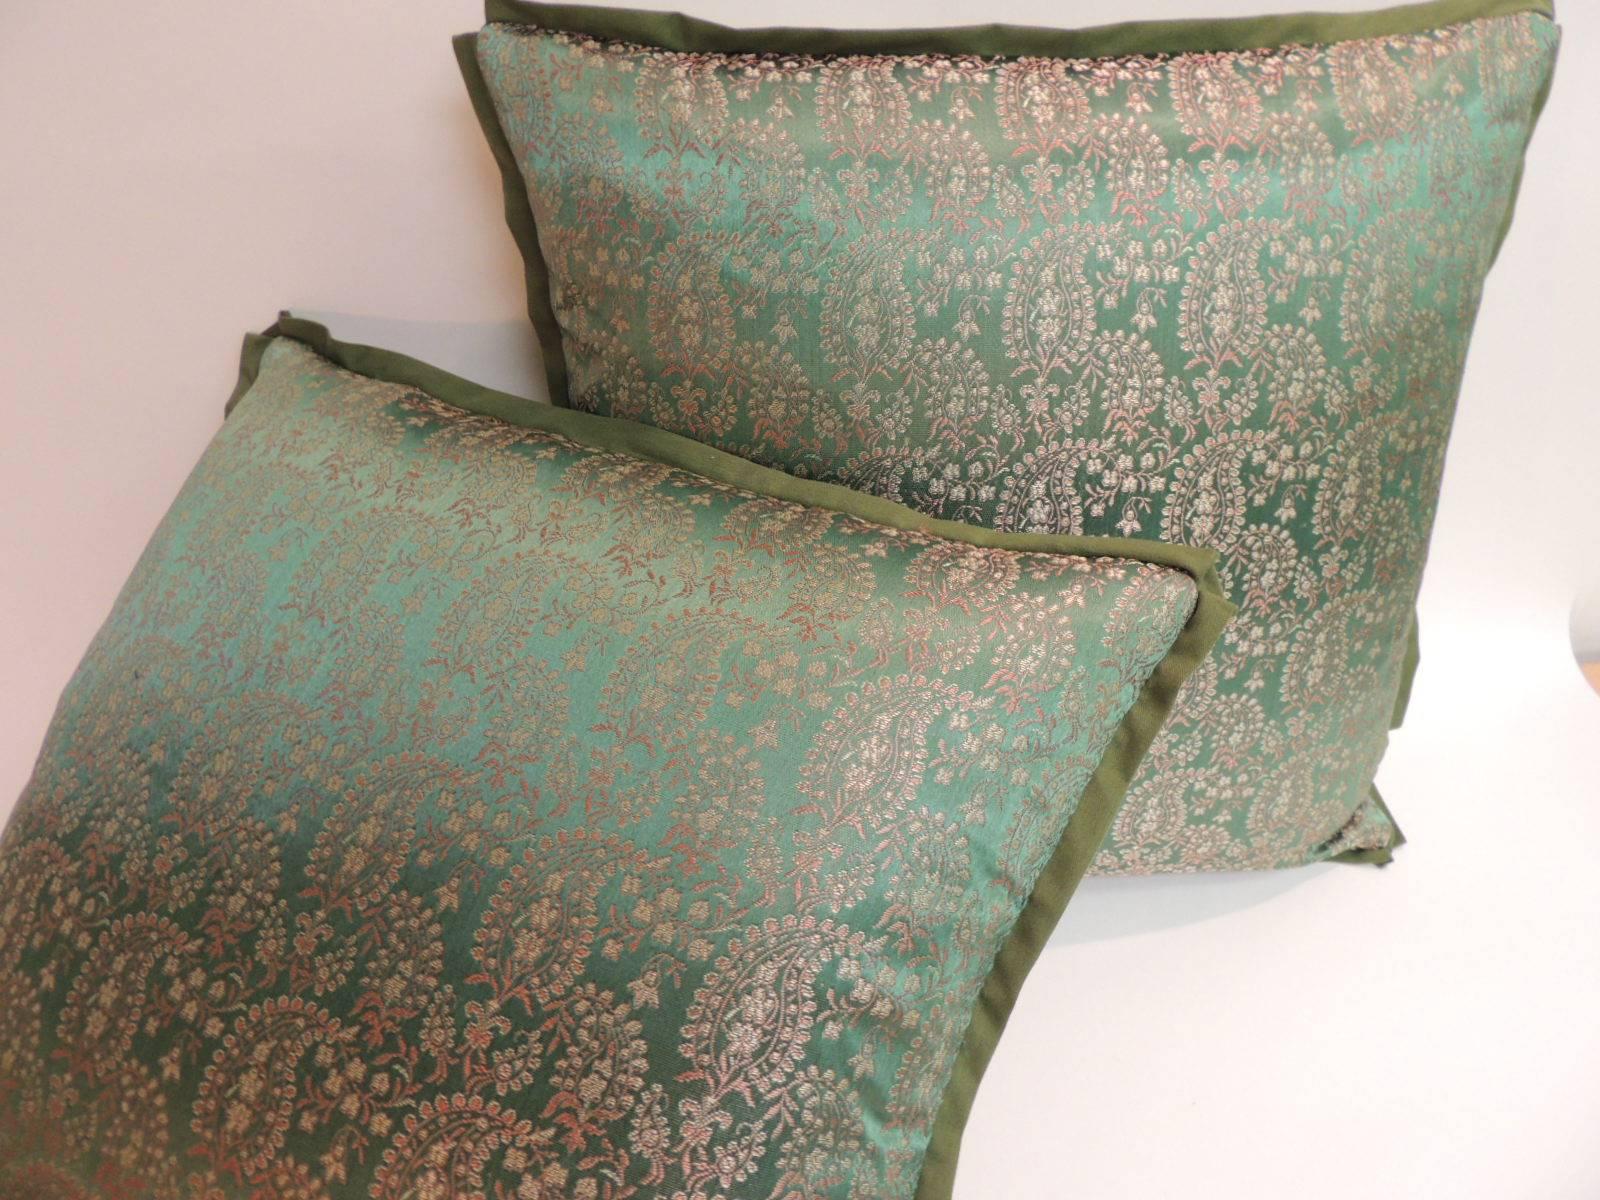 Pair of Green and Gold Embroidered Indian Saree Decorative Pillows
Square pillows with ATG custom flat silk trim and golden silk backings.
Decorative pillows handcrafted with an antique textile were hand-stitched and designed in the USA. 
Closure by